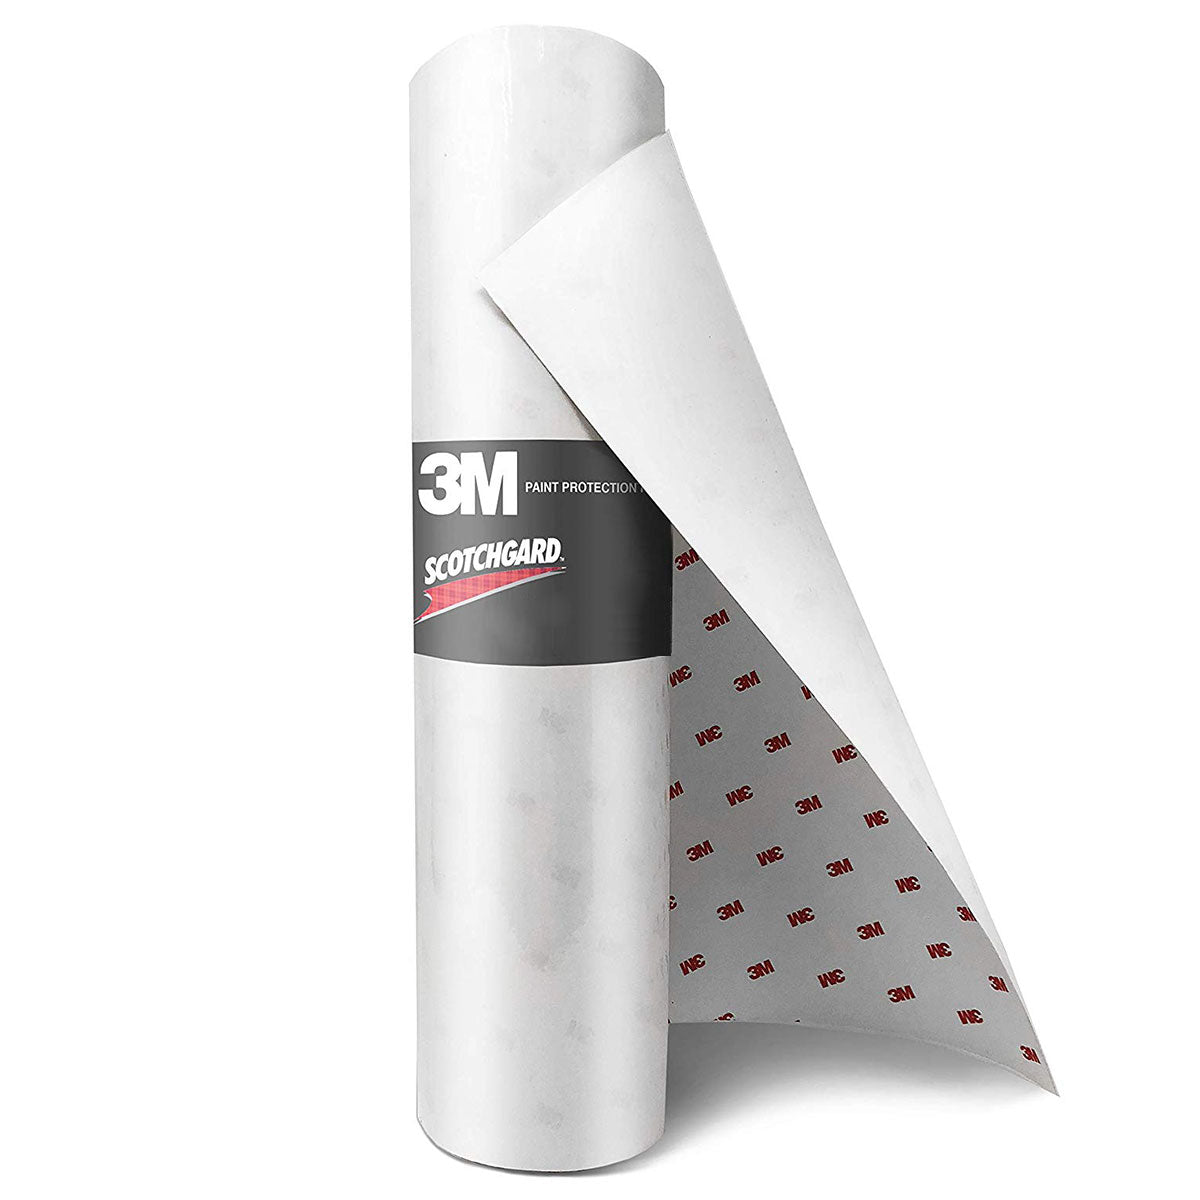 3M SCOTCHGARD PRO PAINT PROTECTION FILM CLEAR BRA FOR 20-22 TOYOTA